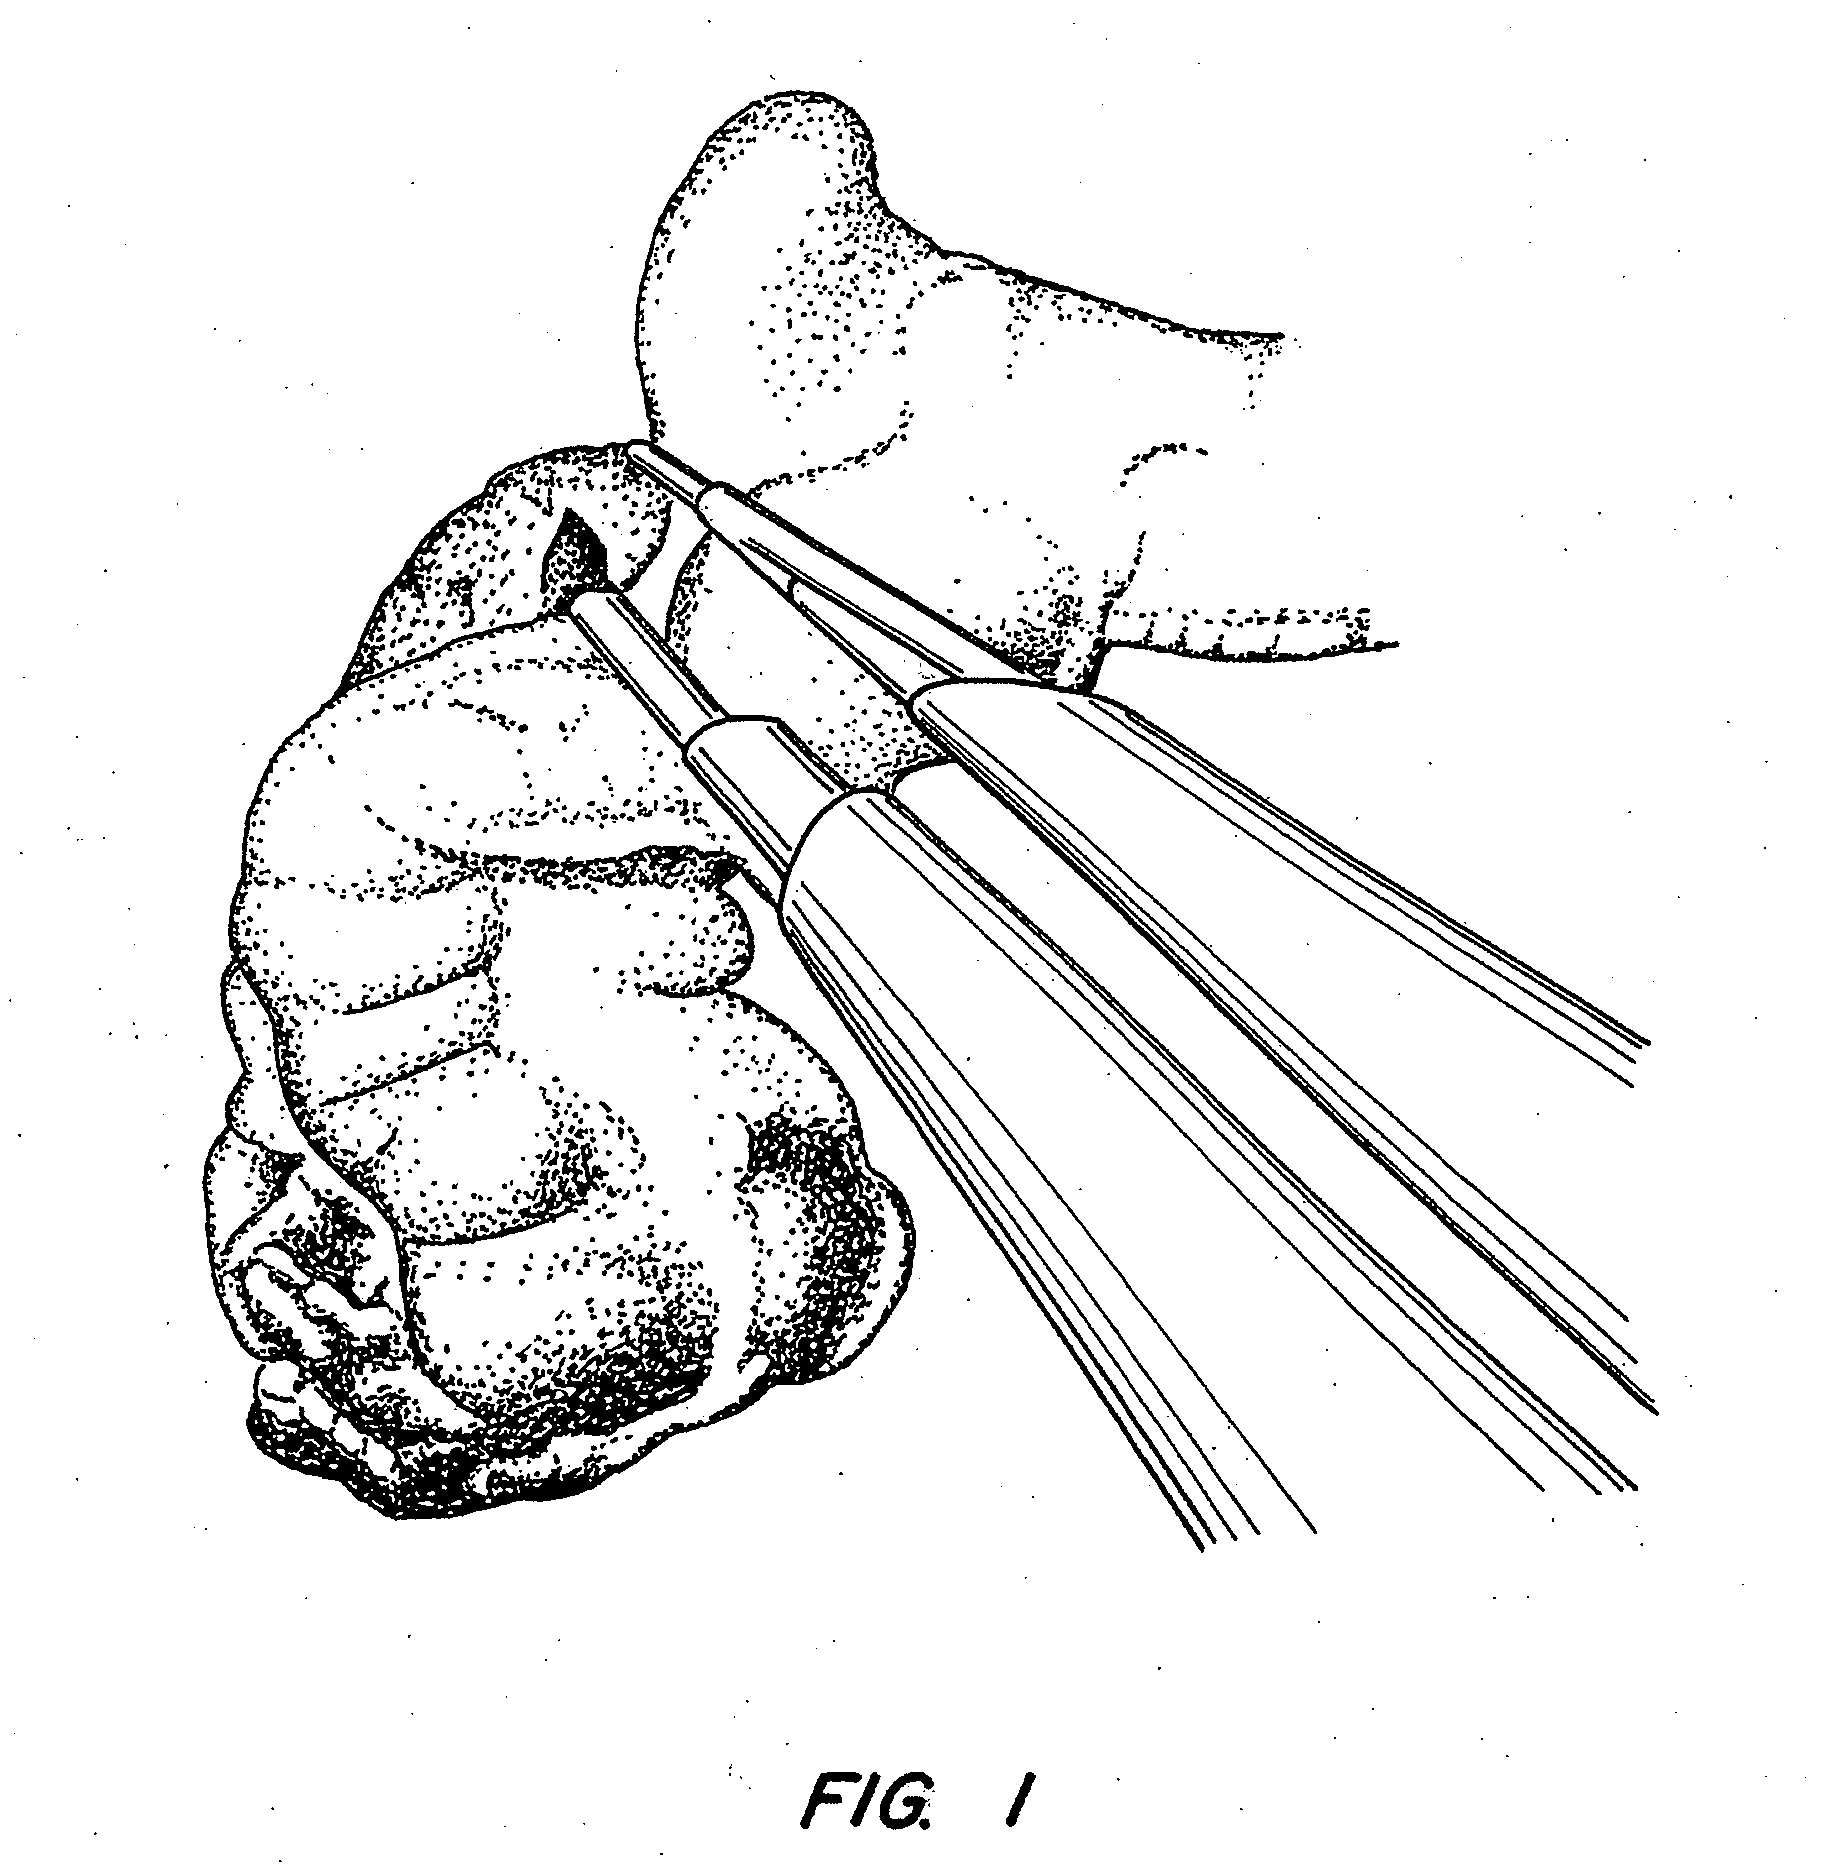 Apparatus and method for endoscopic colectomy